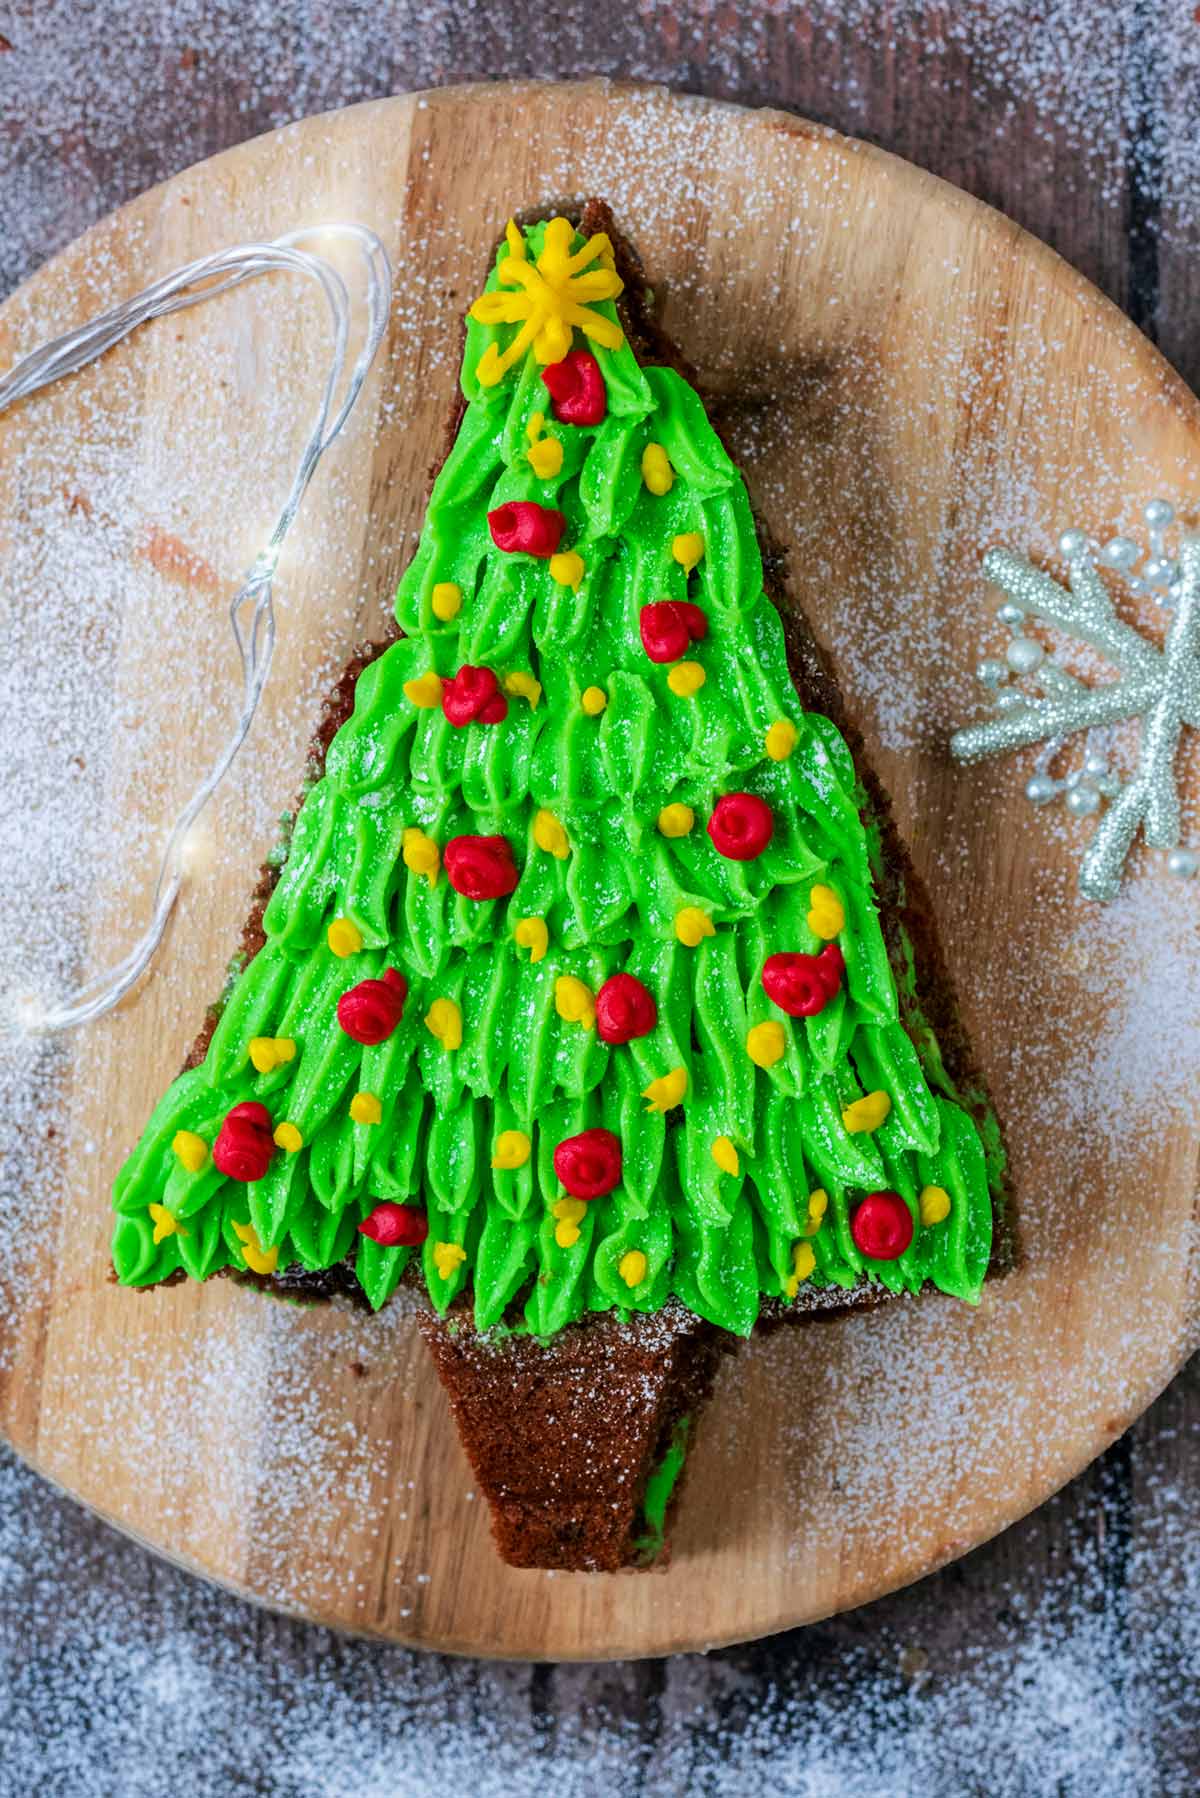 A Christmas tree shaped cake on a board with fairy lights and a decorative snowflake.